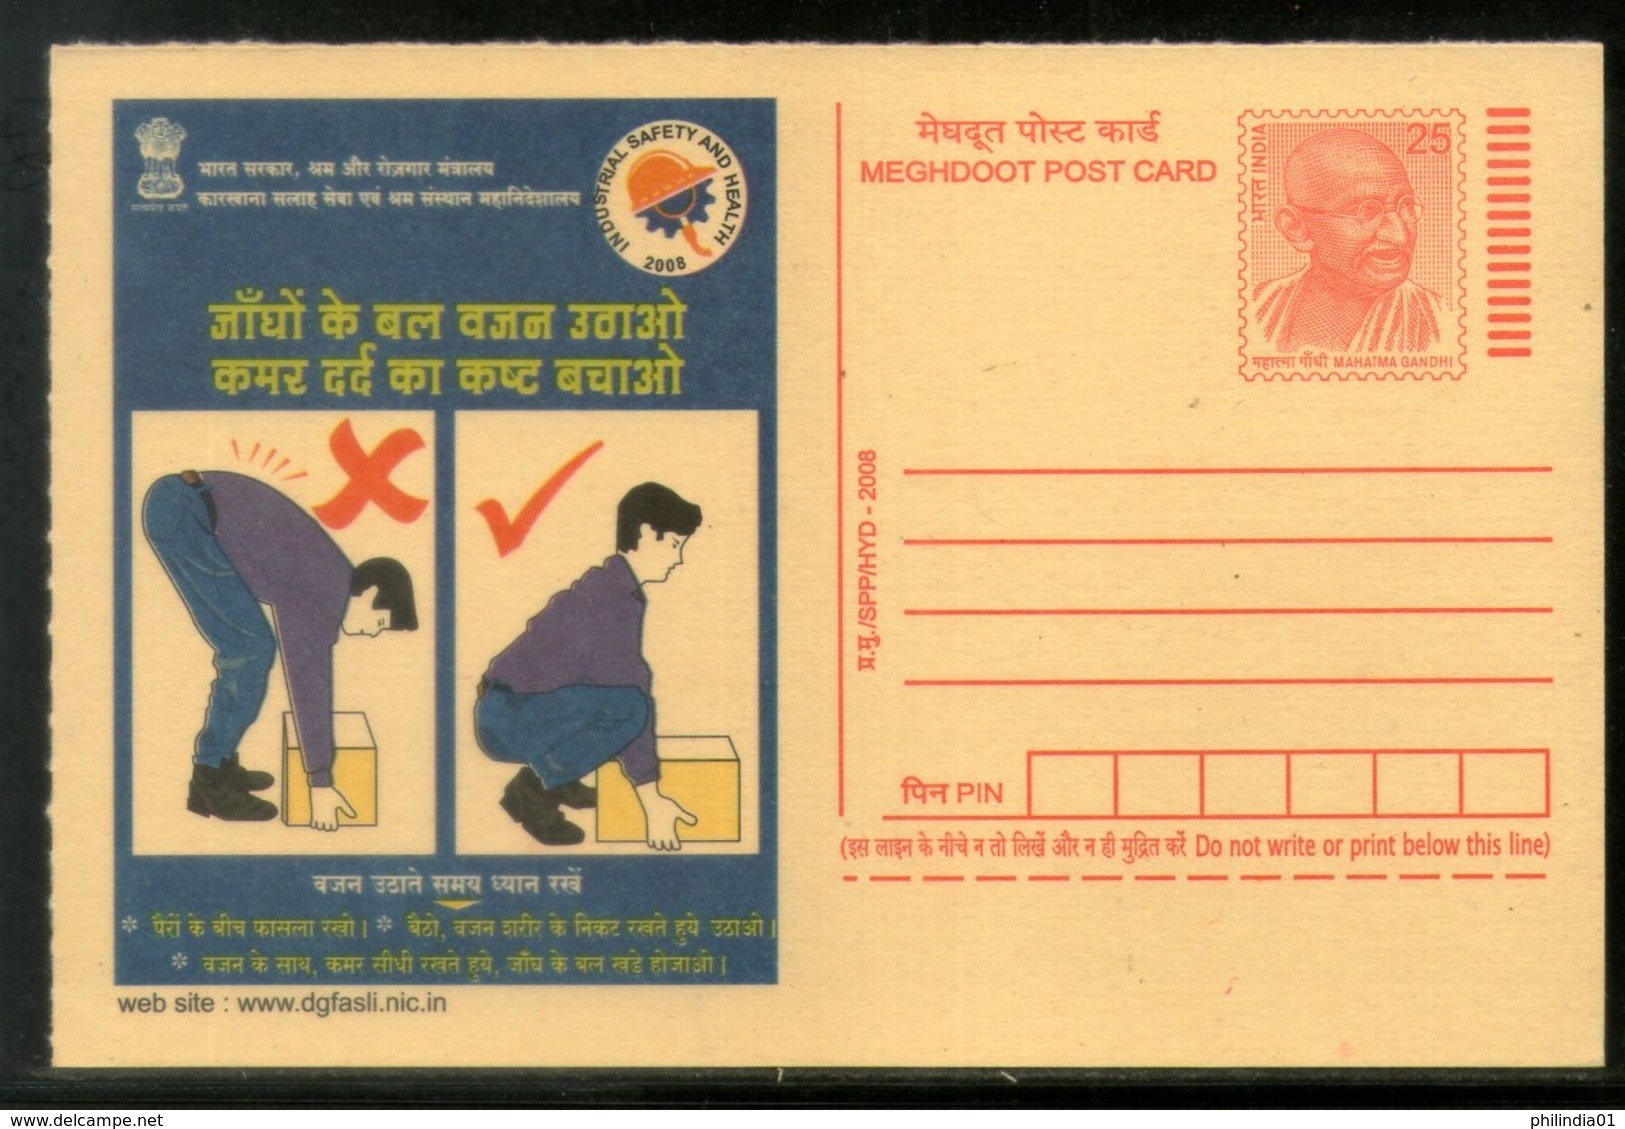 India 2008 Prevent Backaches Industrial Safety & Health Hindi Advert.Gandhi Post Card # 501 - Accidents & Road Safety